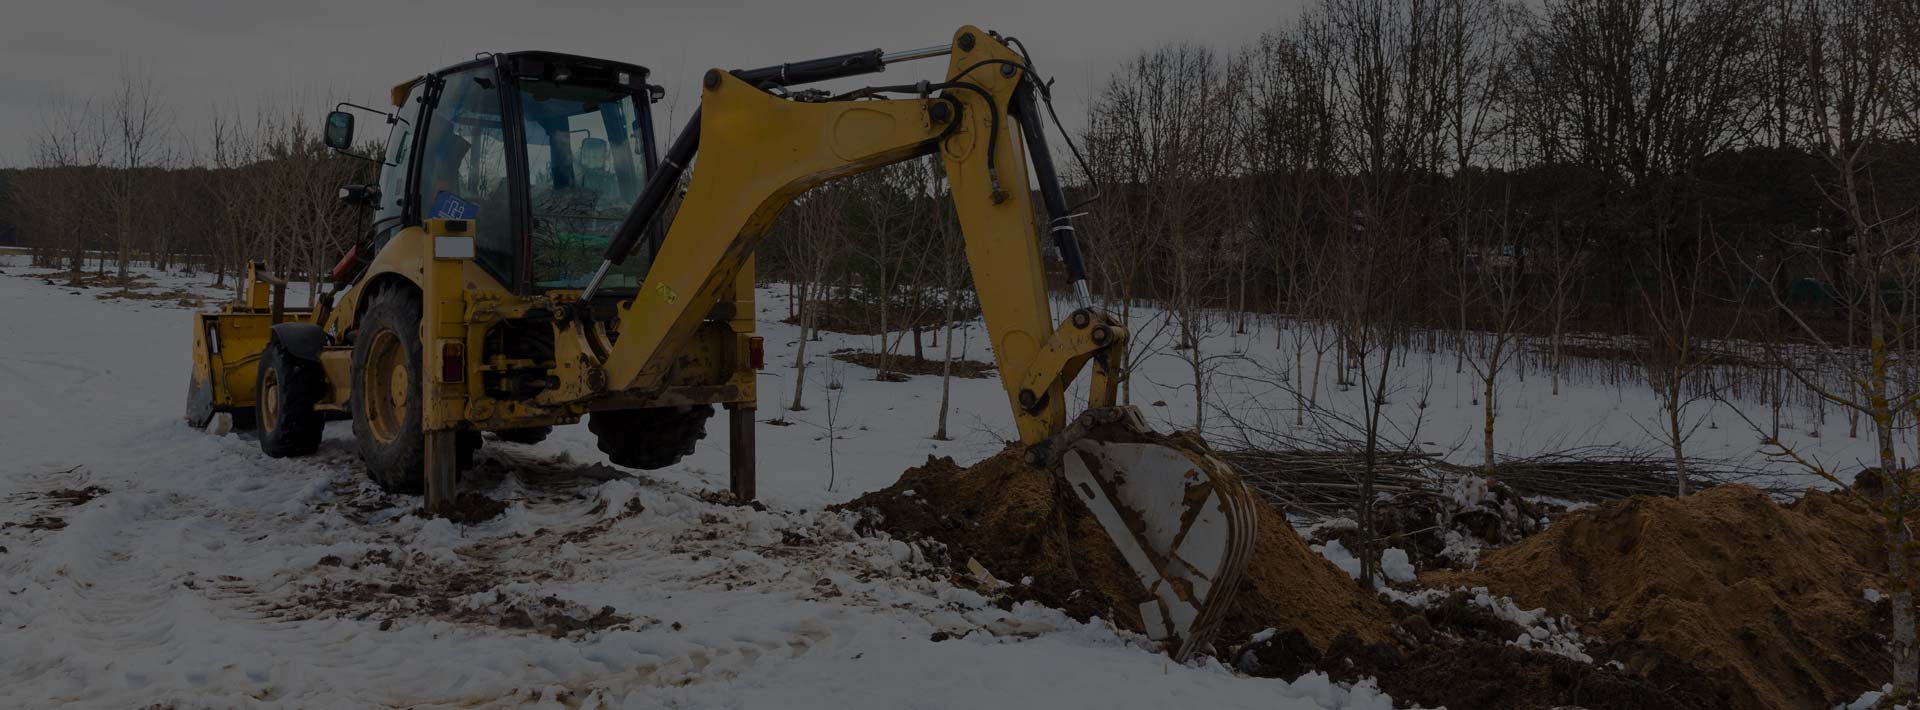 construction equipment digging a trench for electrical